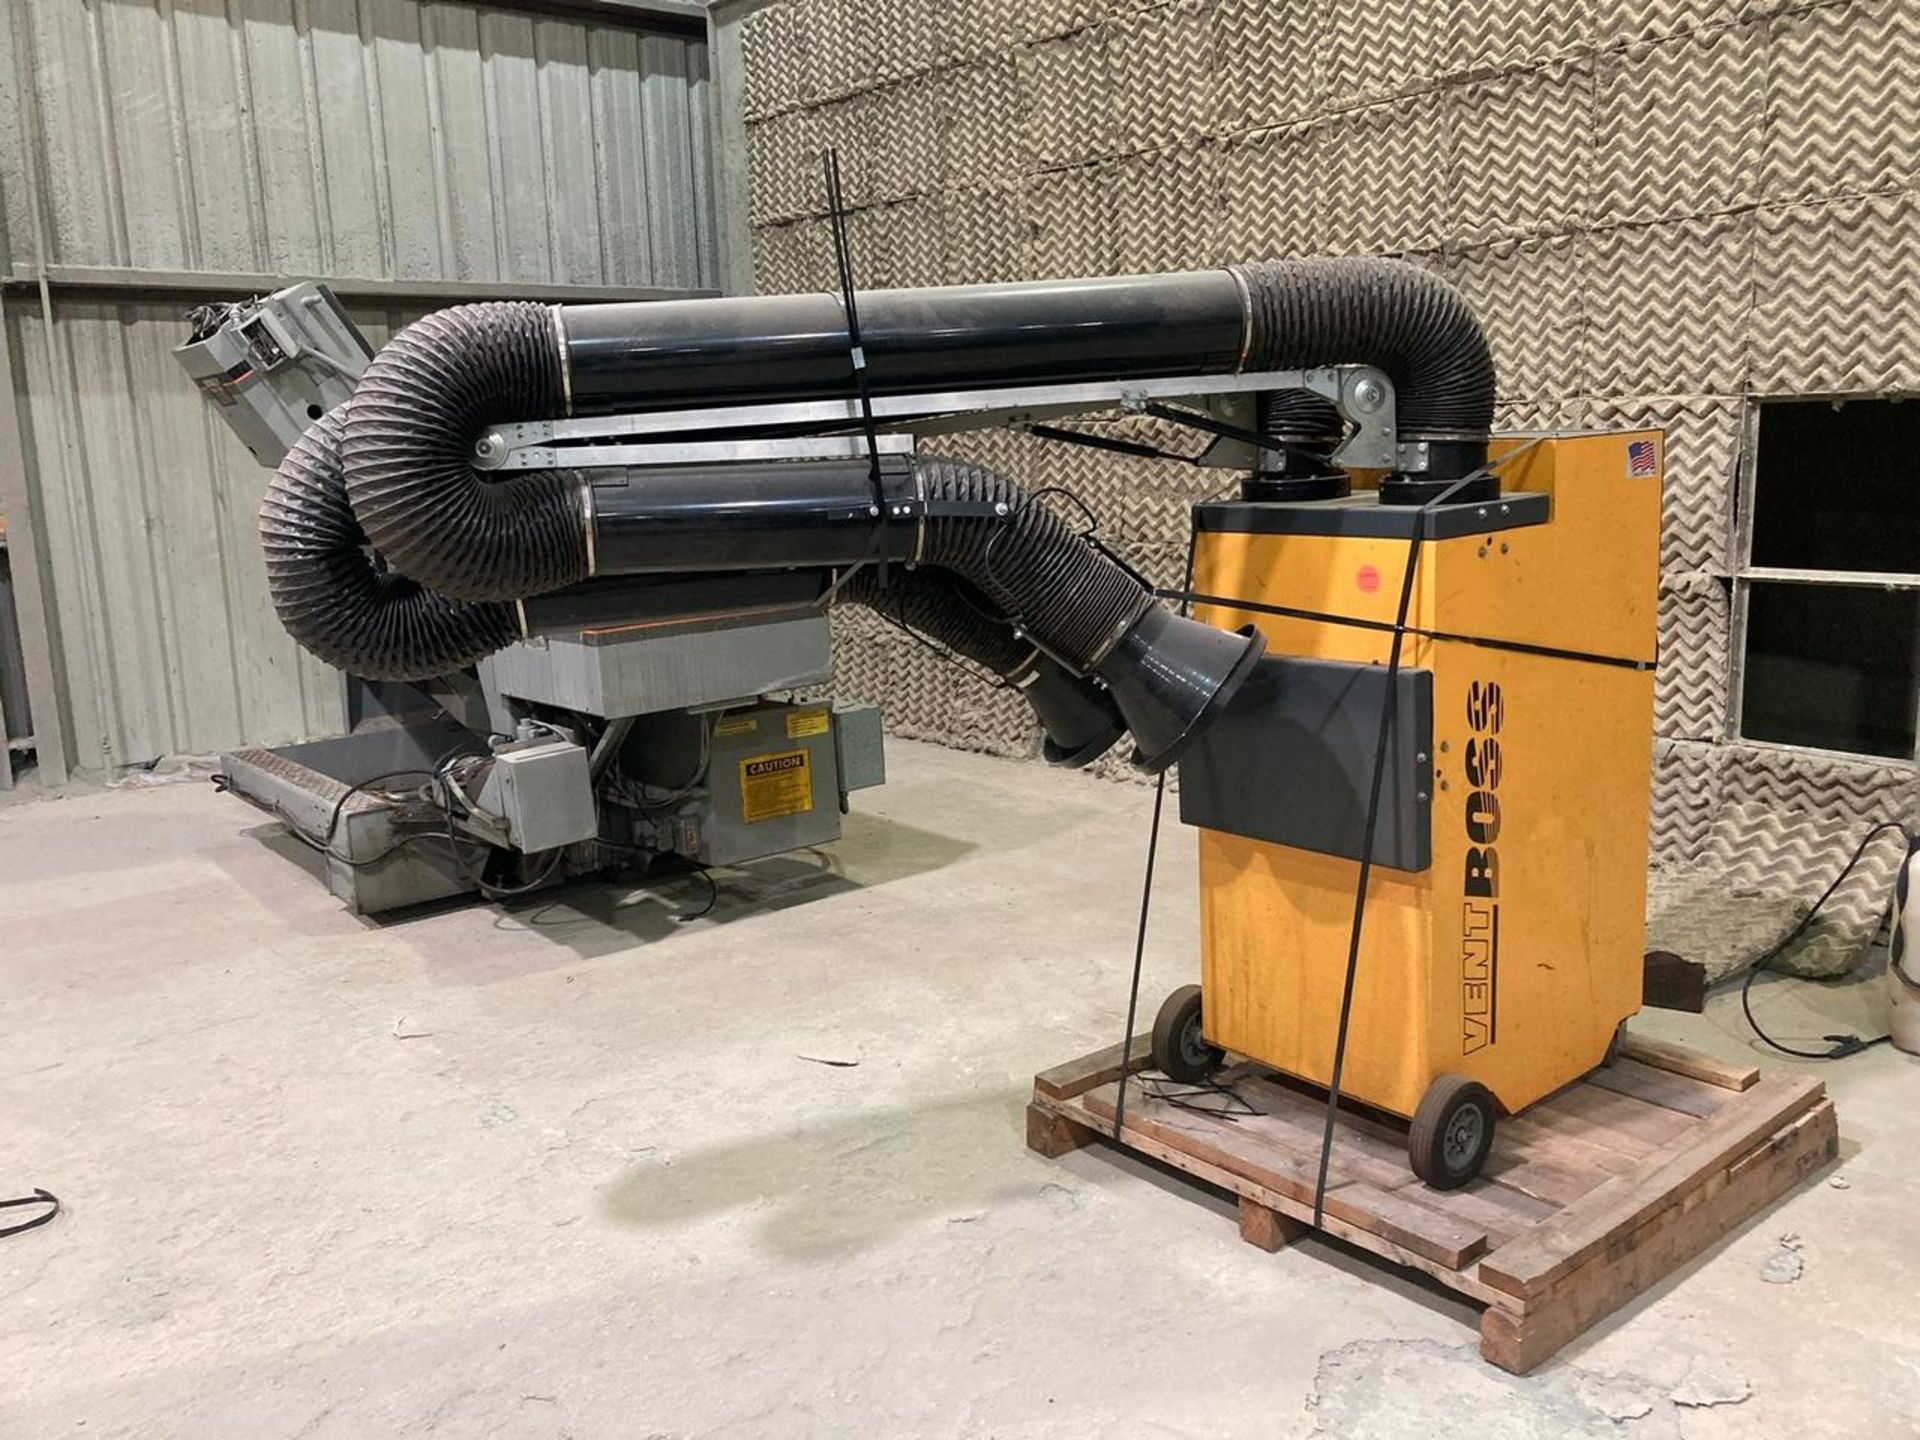 2020 Robovent Ventboss VB-1200-1 Fume Extractor - Image 2 of 3